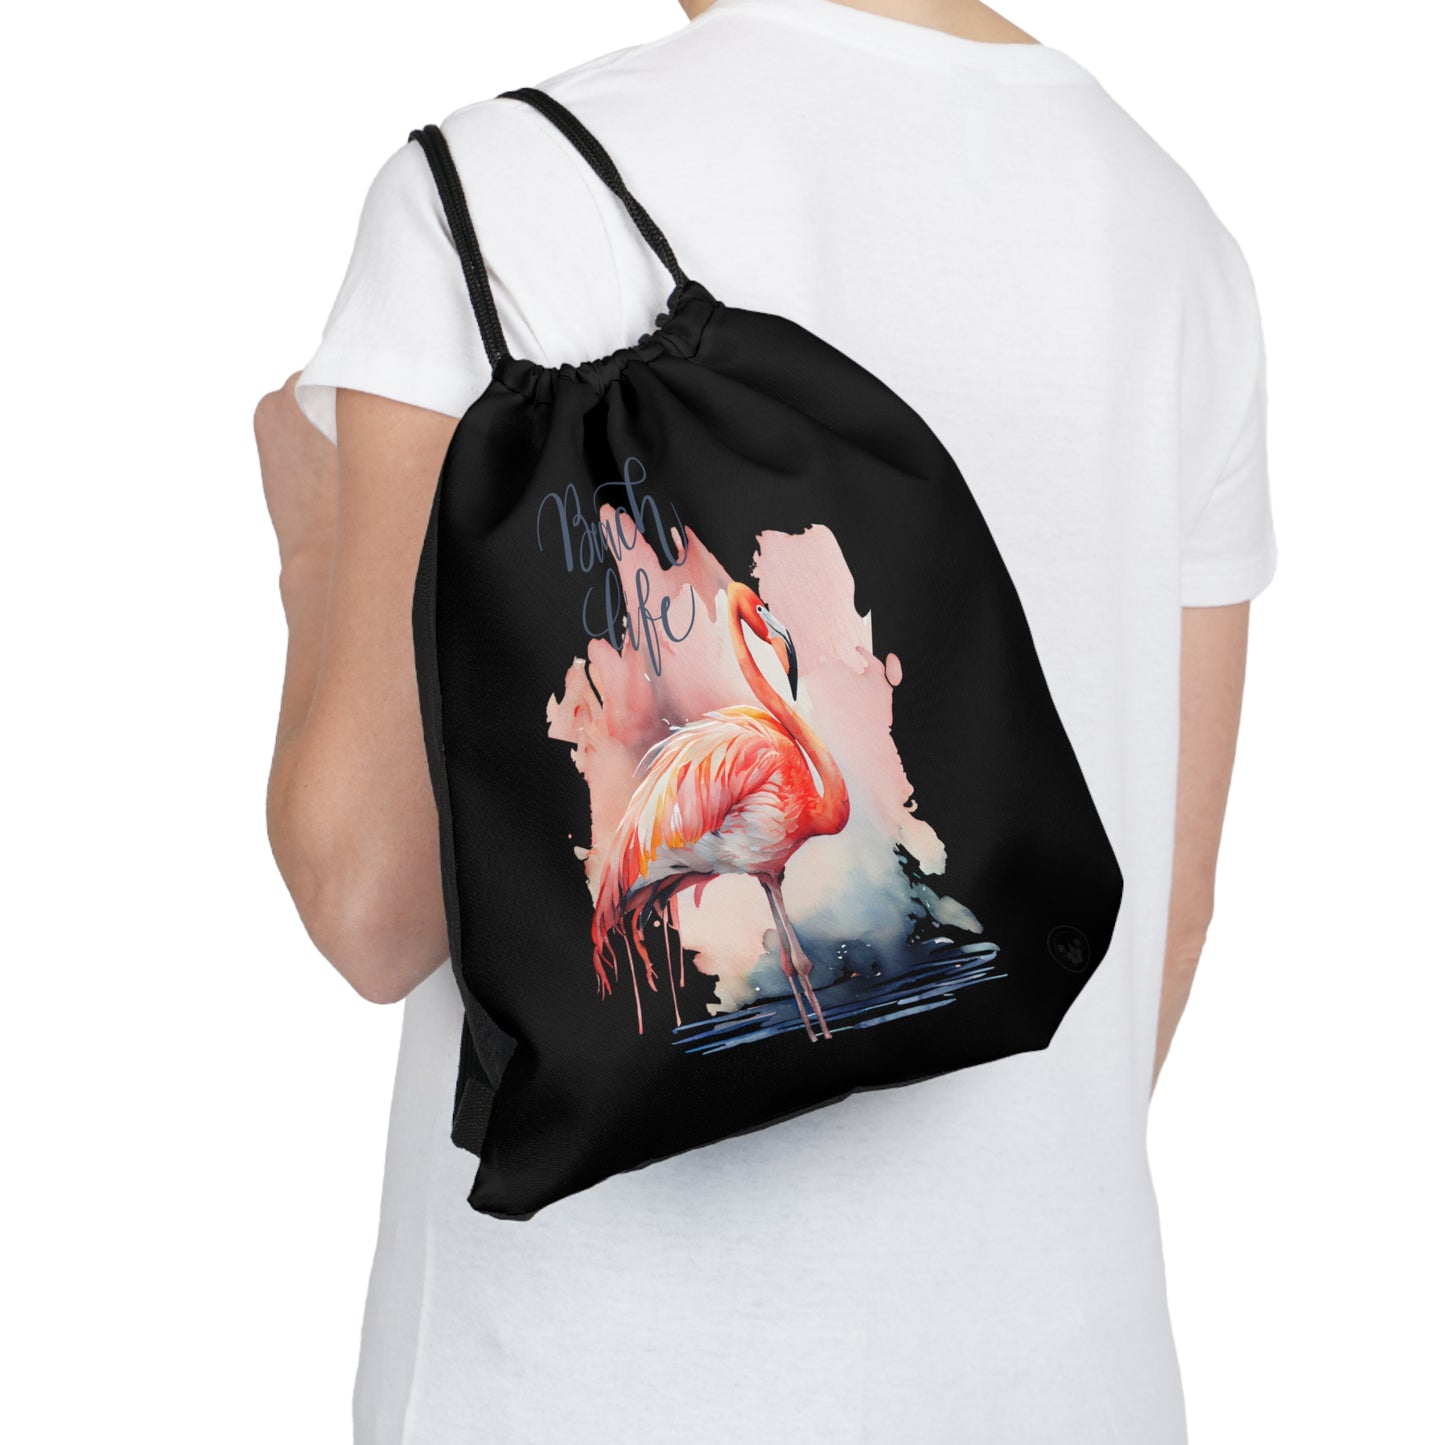 Unleash your wanderlust with our versatile drawstring backpack! Embrace travel with ease and style, flaunting a Beach Life Flamingo graphic with bright color backgrounds. This one is a black background. Designed for adventurers, it's the perfect blend of practicality and fashion. Get yours today for your next adventure! This is a front view of the backpack on the back of a model. 